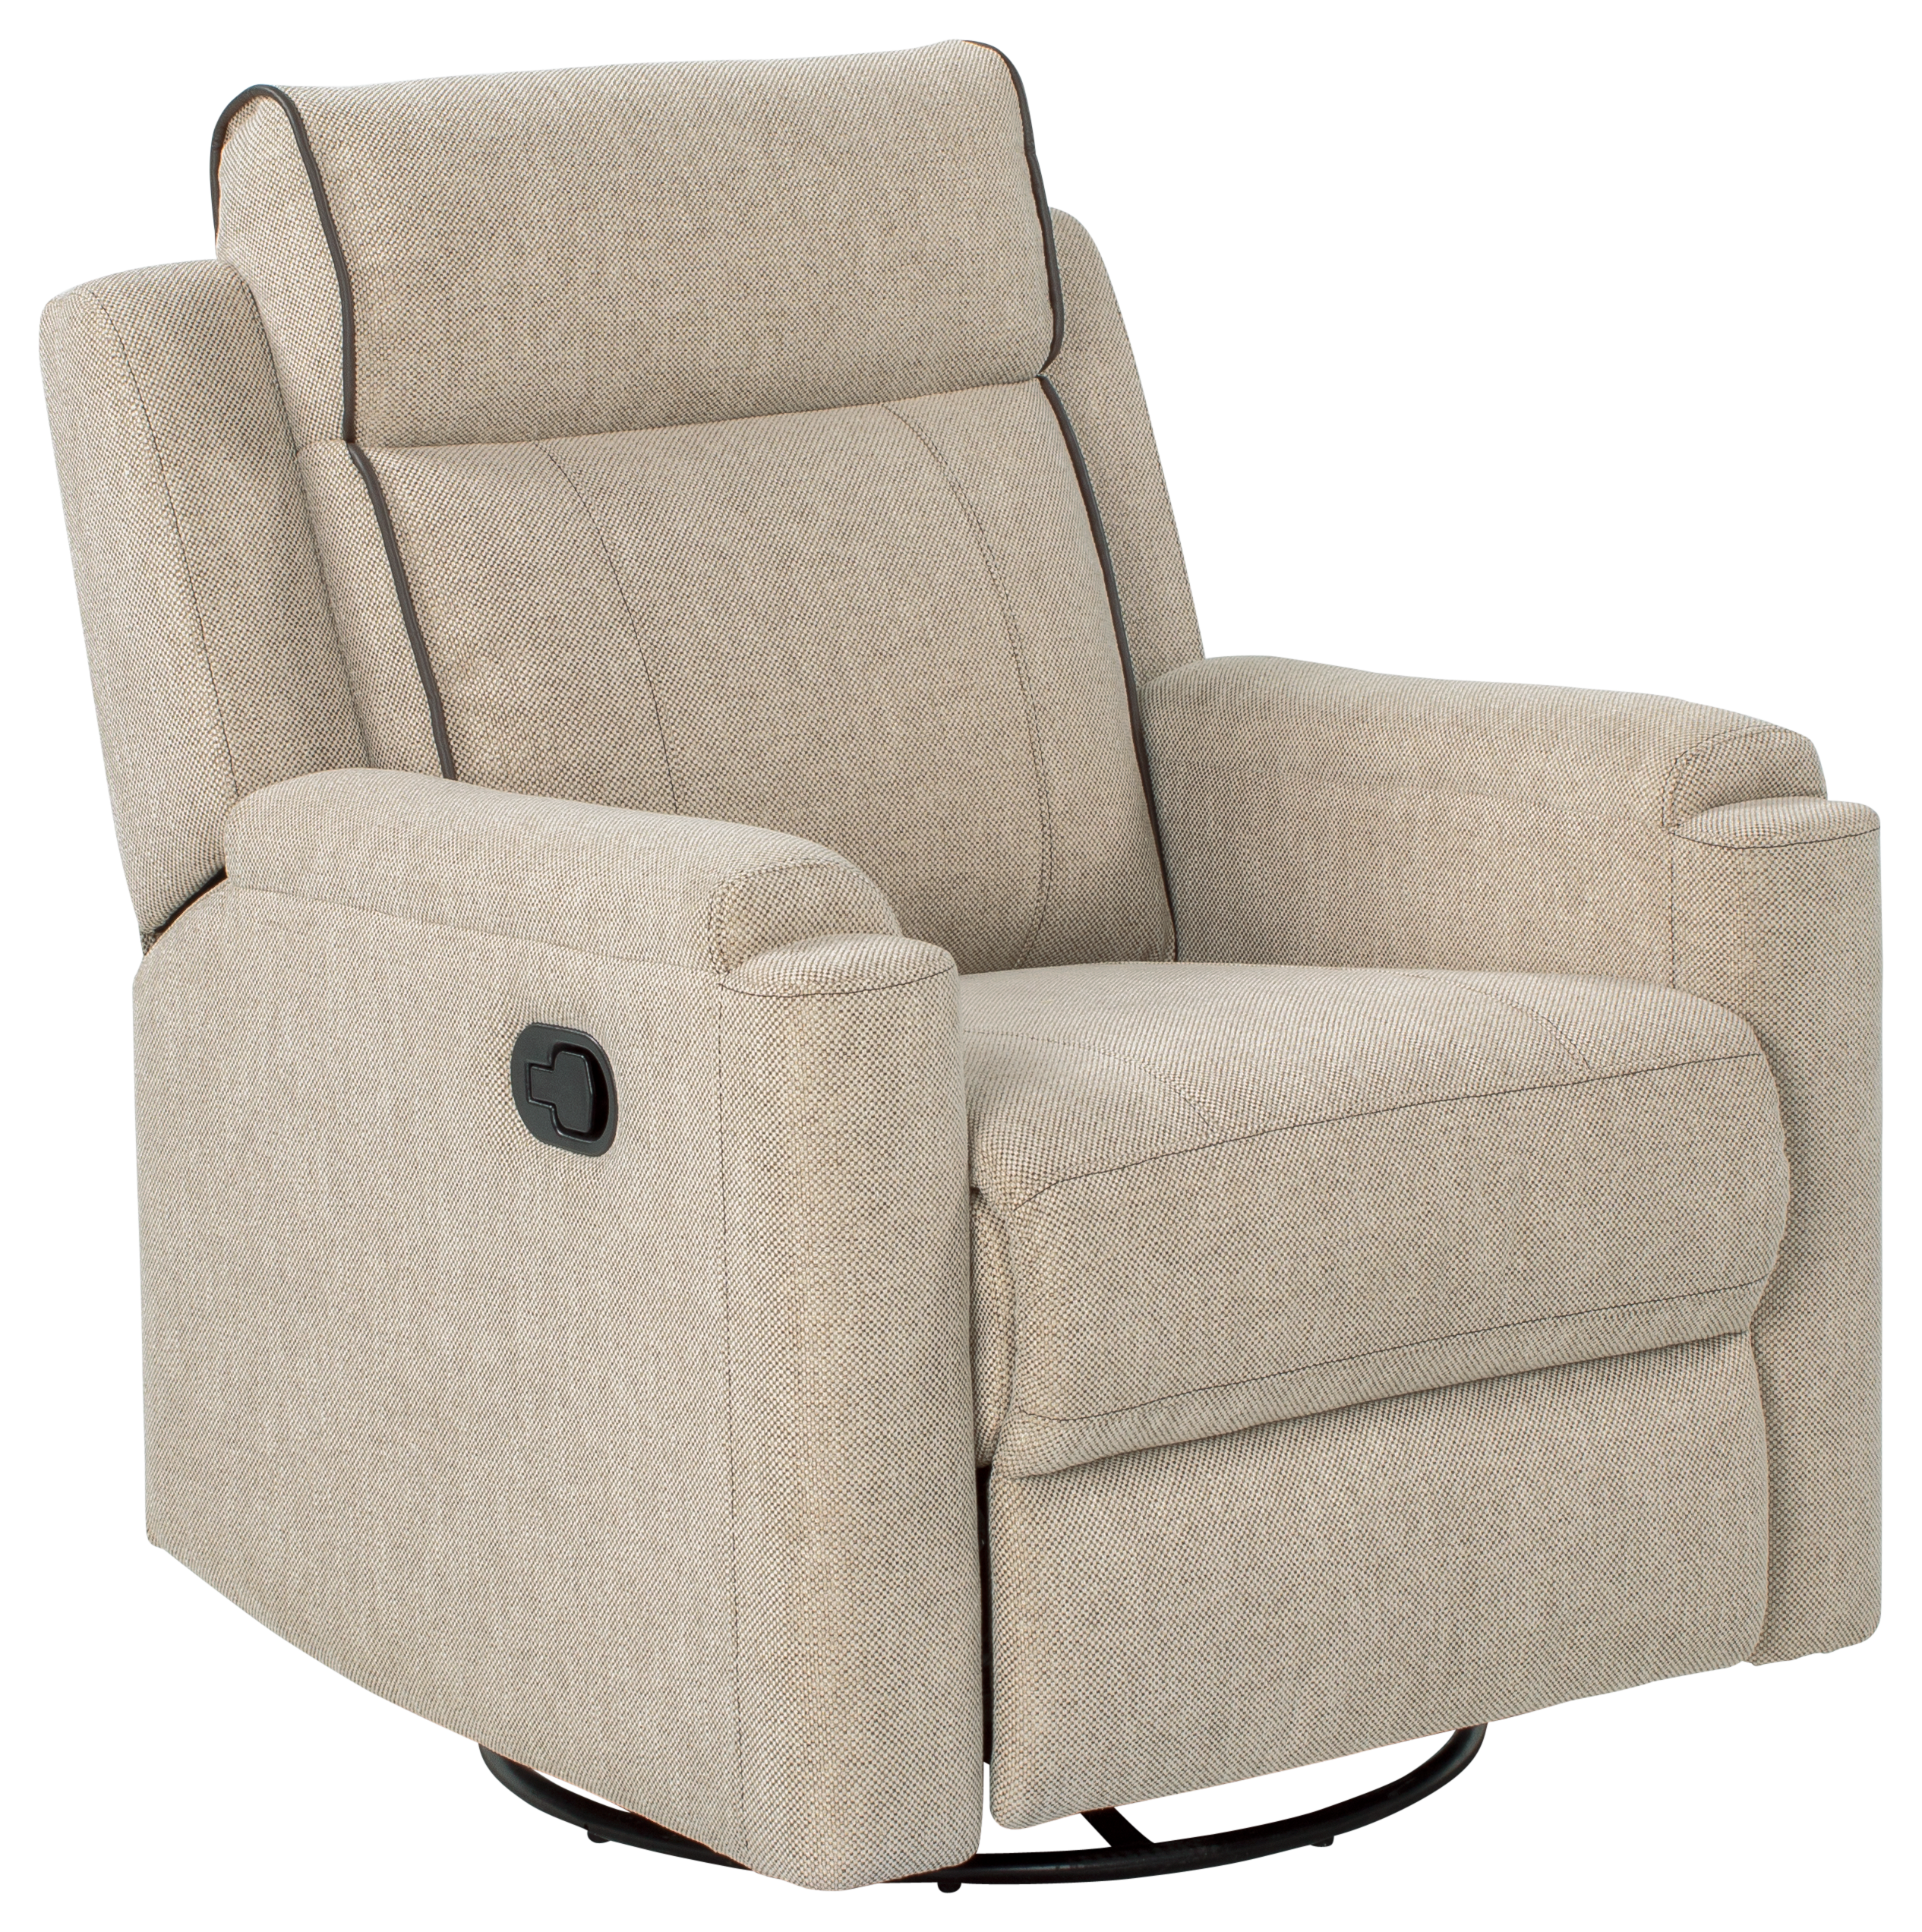 Thomas Payne Norlina RV Furniture Collection Swivel Glider Recliner